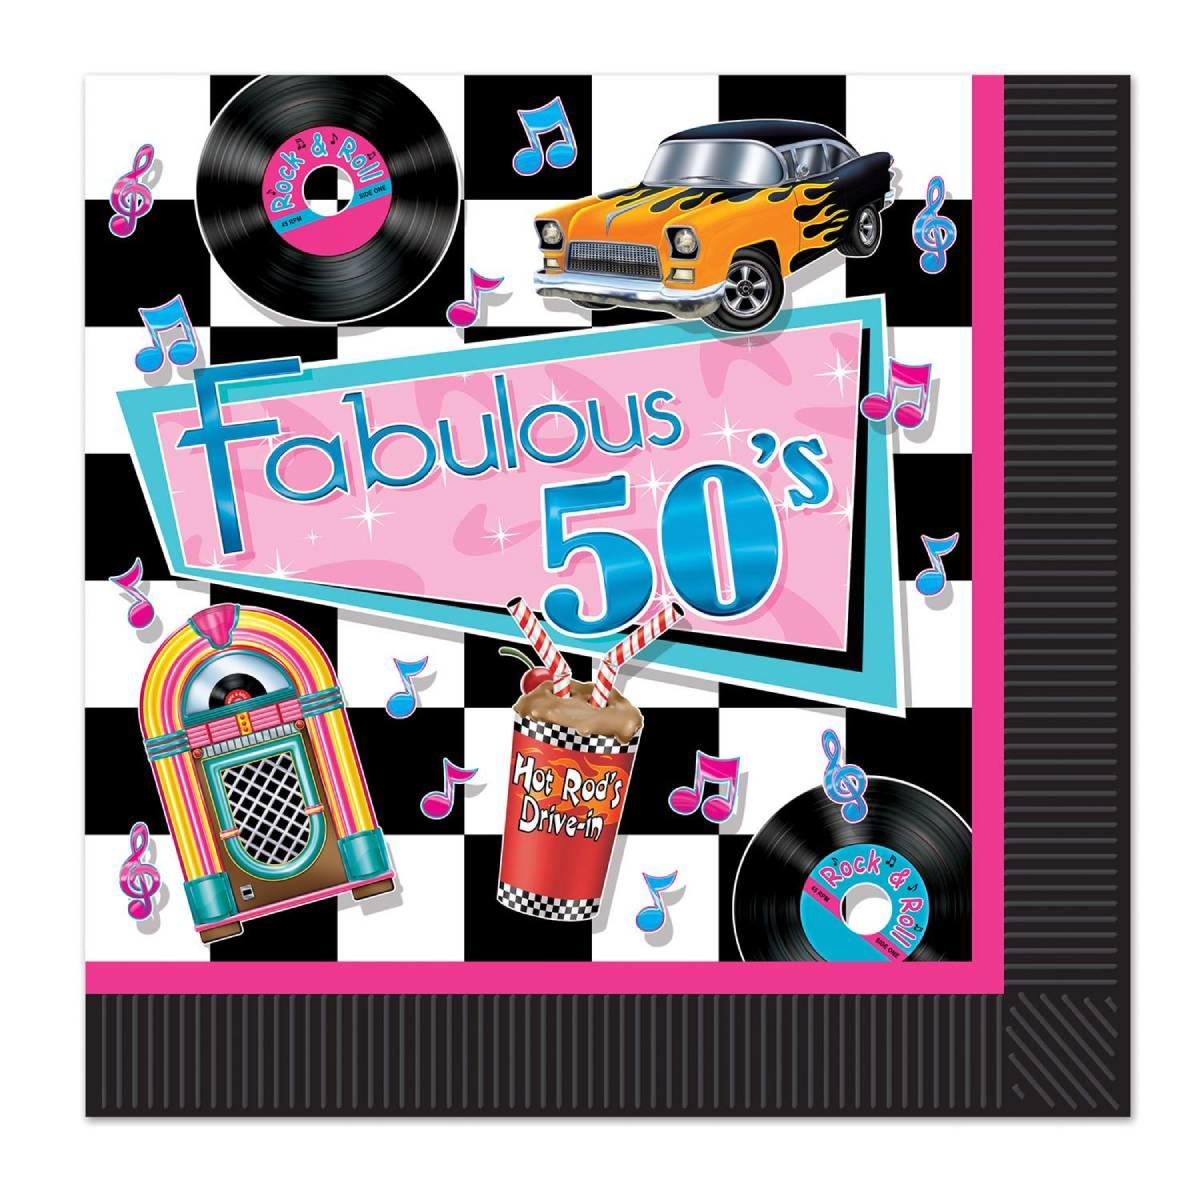 Fabulous 50's Paper Luncheon Napkins pk16 by Beistle 58135 available here at Karnival Costumes online party shop